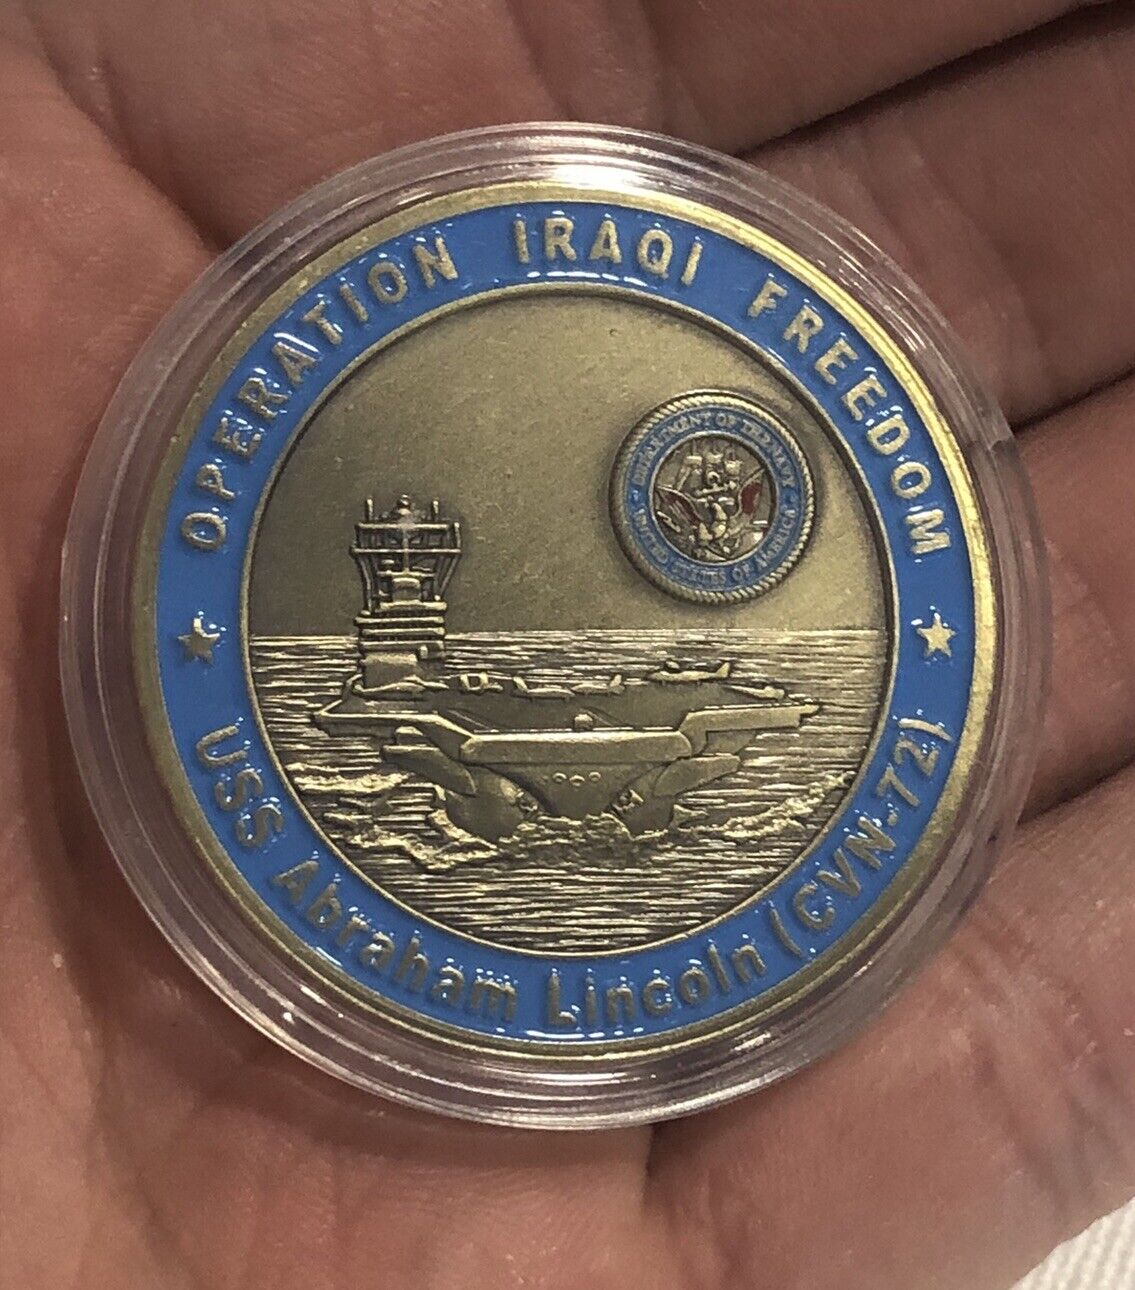 USS Abraham Lincoln Operation Iraqi Freedom Military Challenge Coin Encapsulated